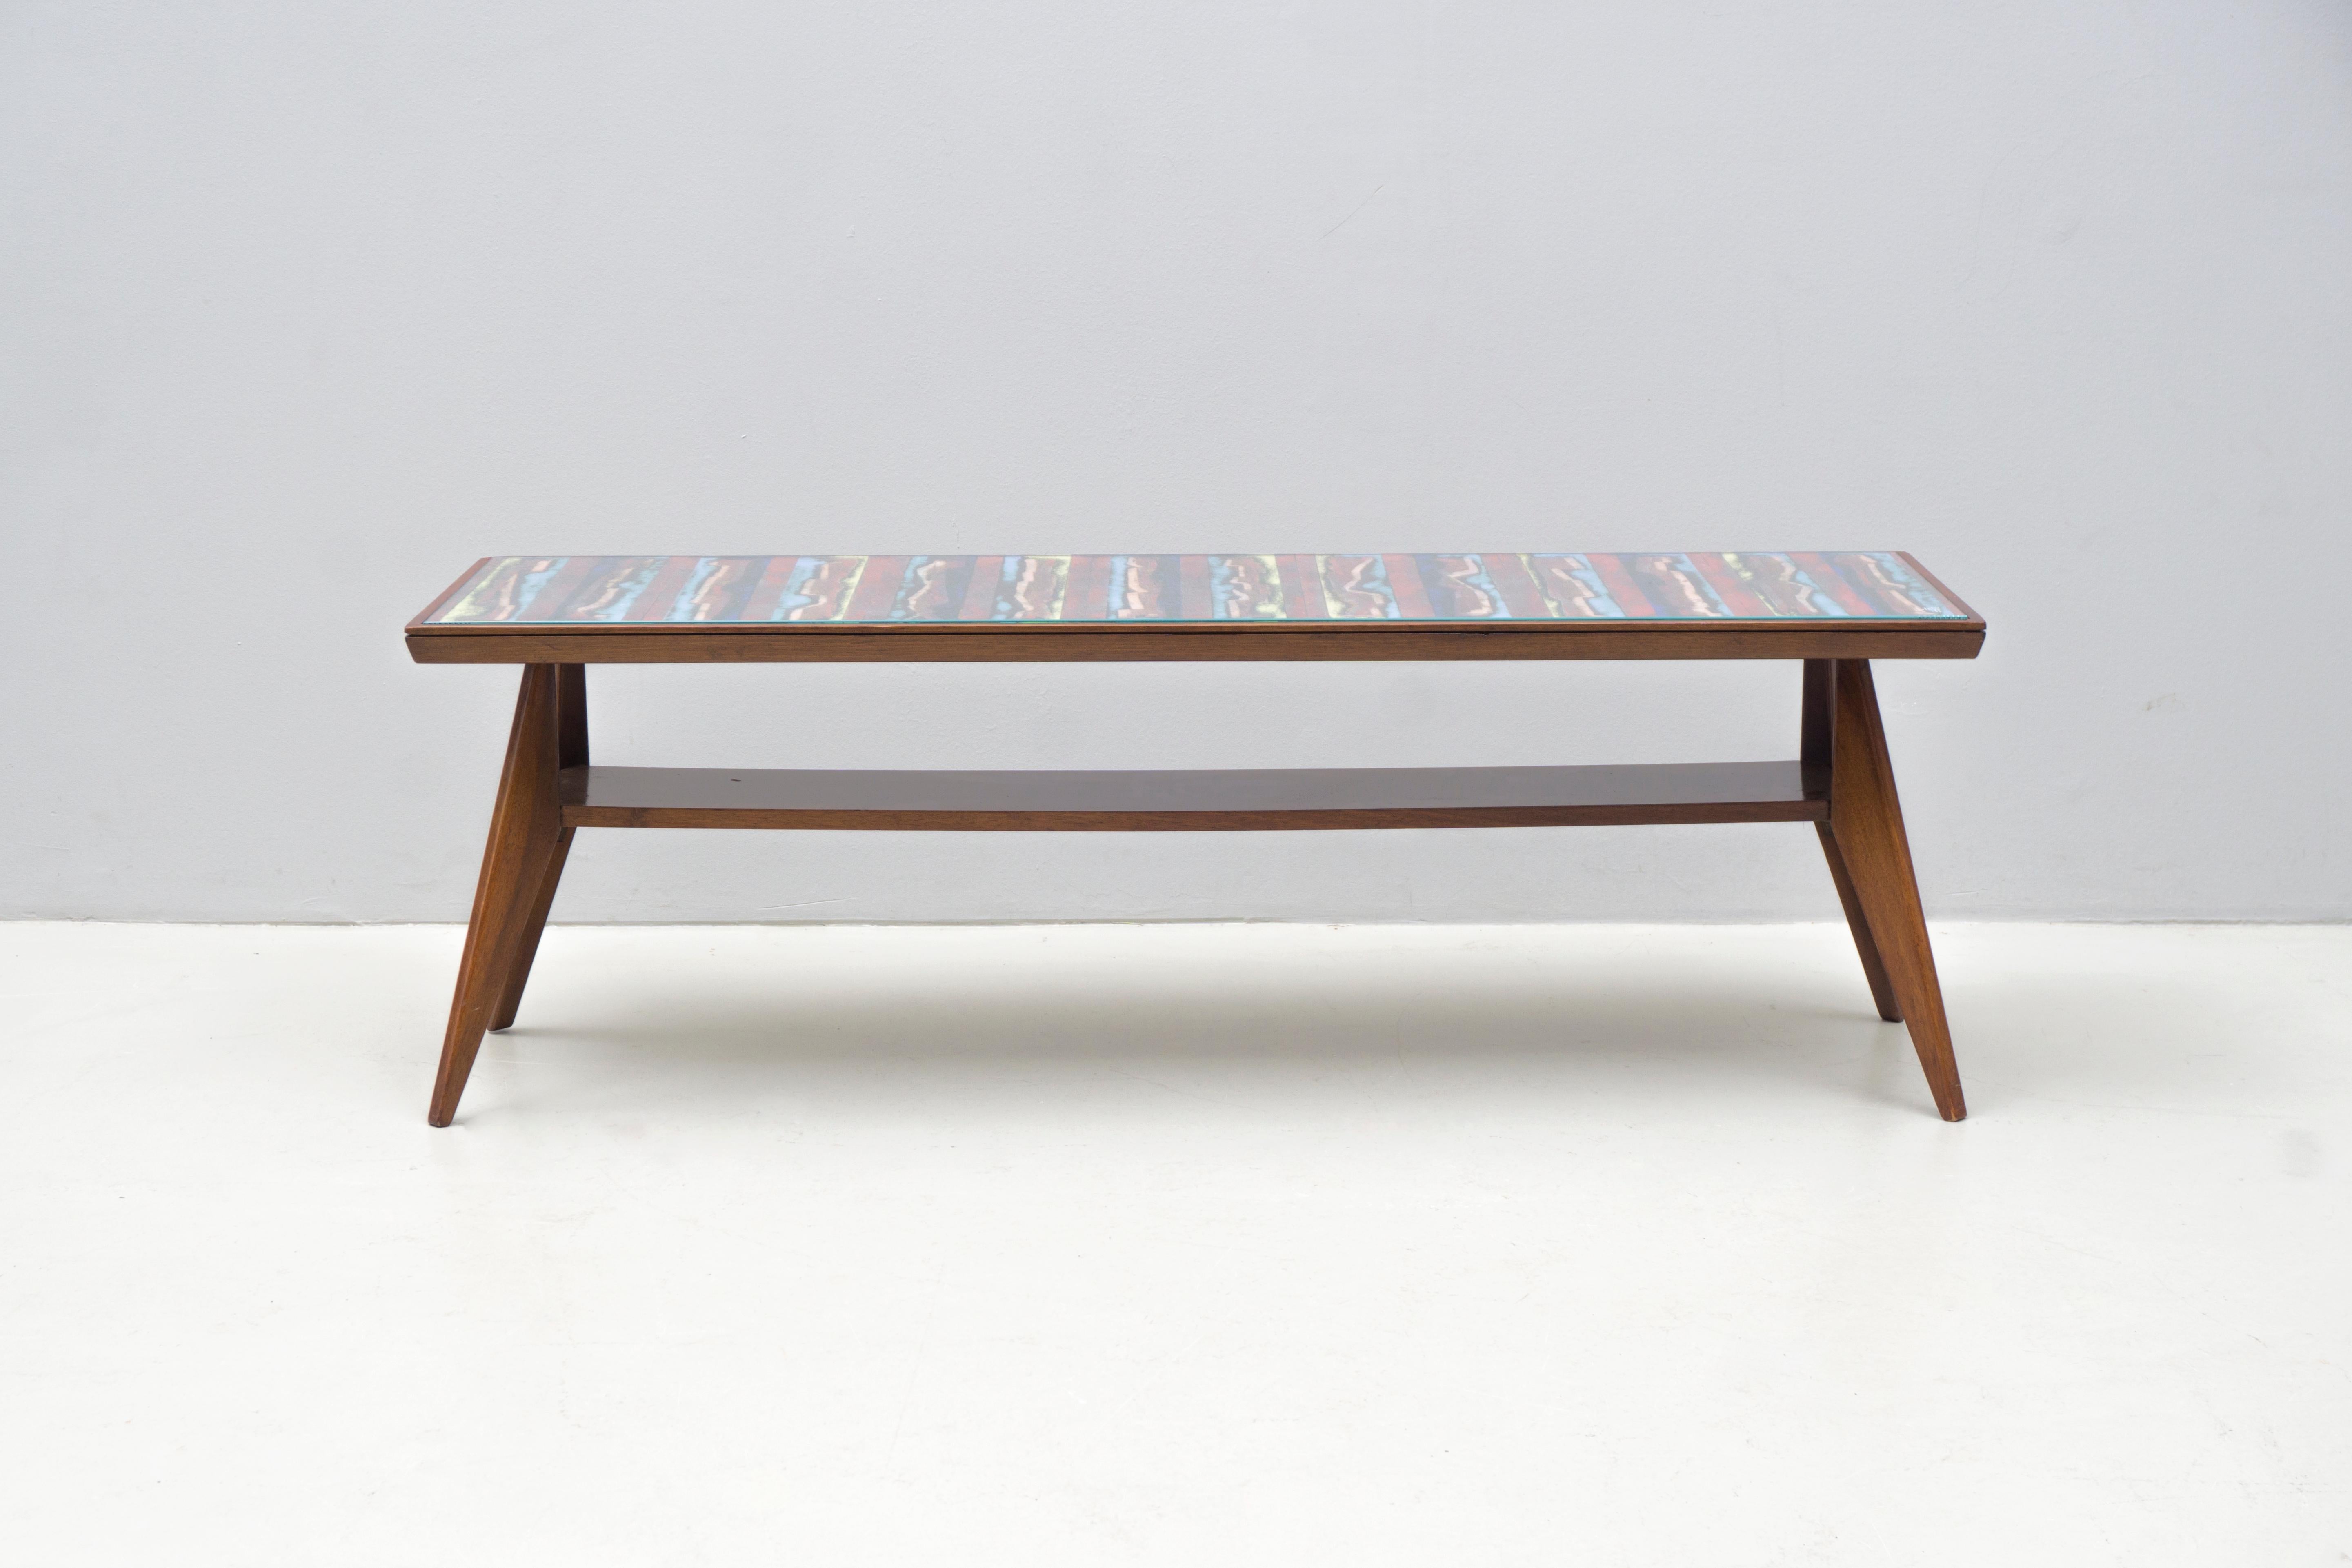 This table is a very unique piece created by Sergio Santi/ VIGNA NOUVA FIRENZE in Florence/Italy around 1950.

The VIGNA NUOVA studio was specialized in creating objects in enamel – interior pieces by this studio are extremely rare.